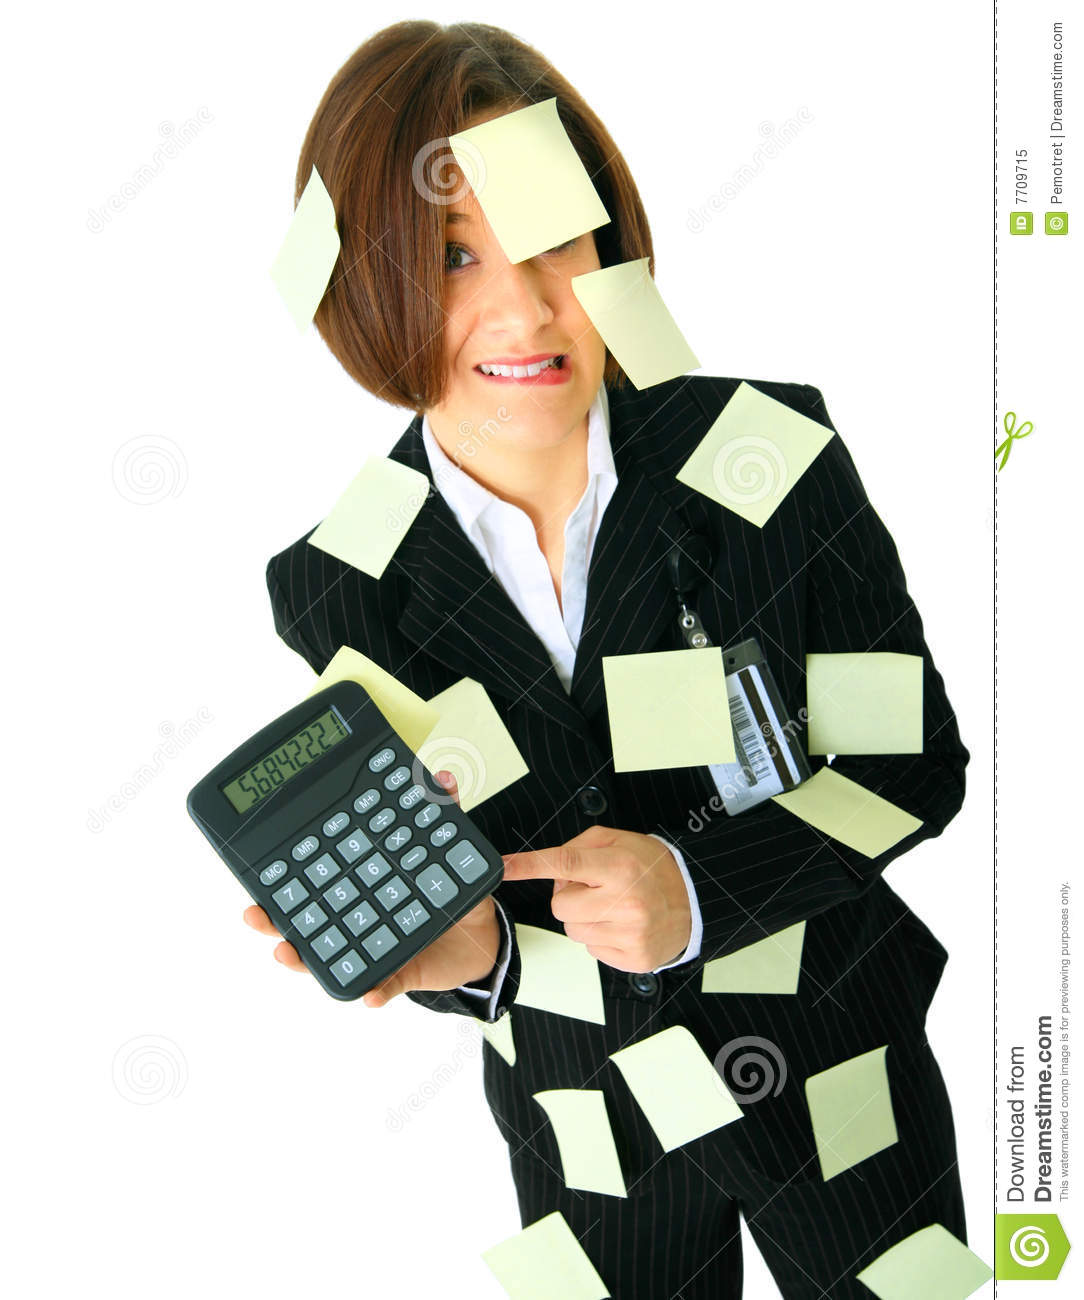 Accountant Stressed With Number On Calculator Royalty Free Stock Photo    